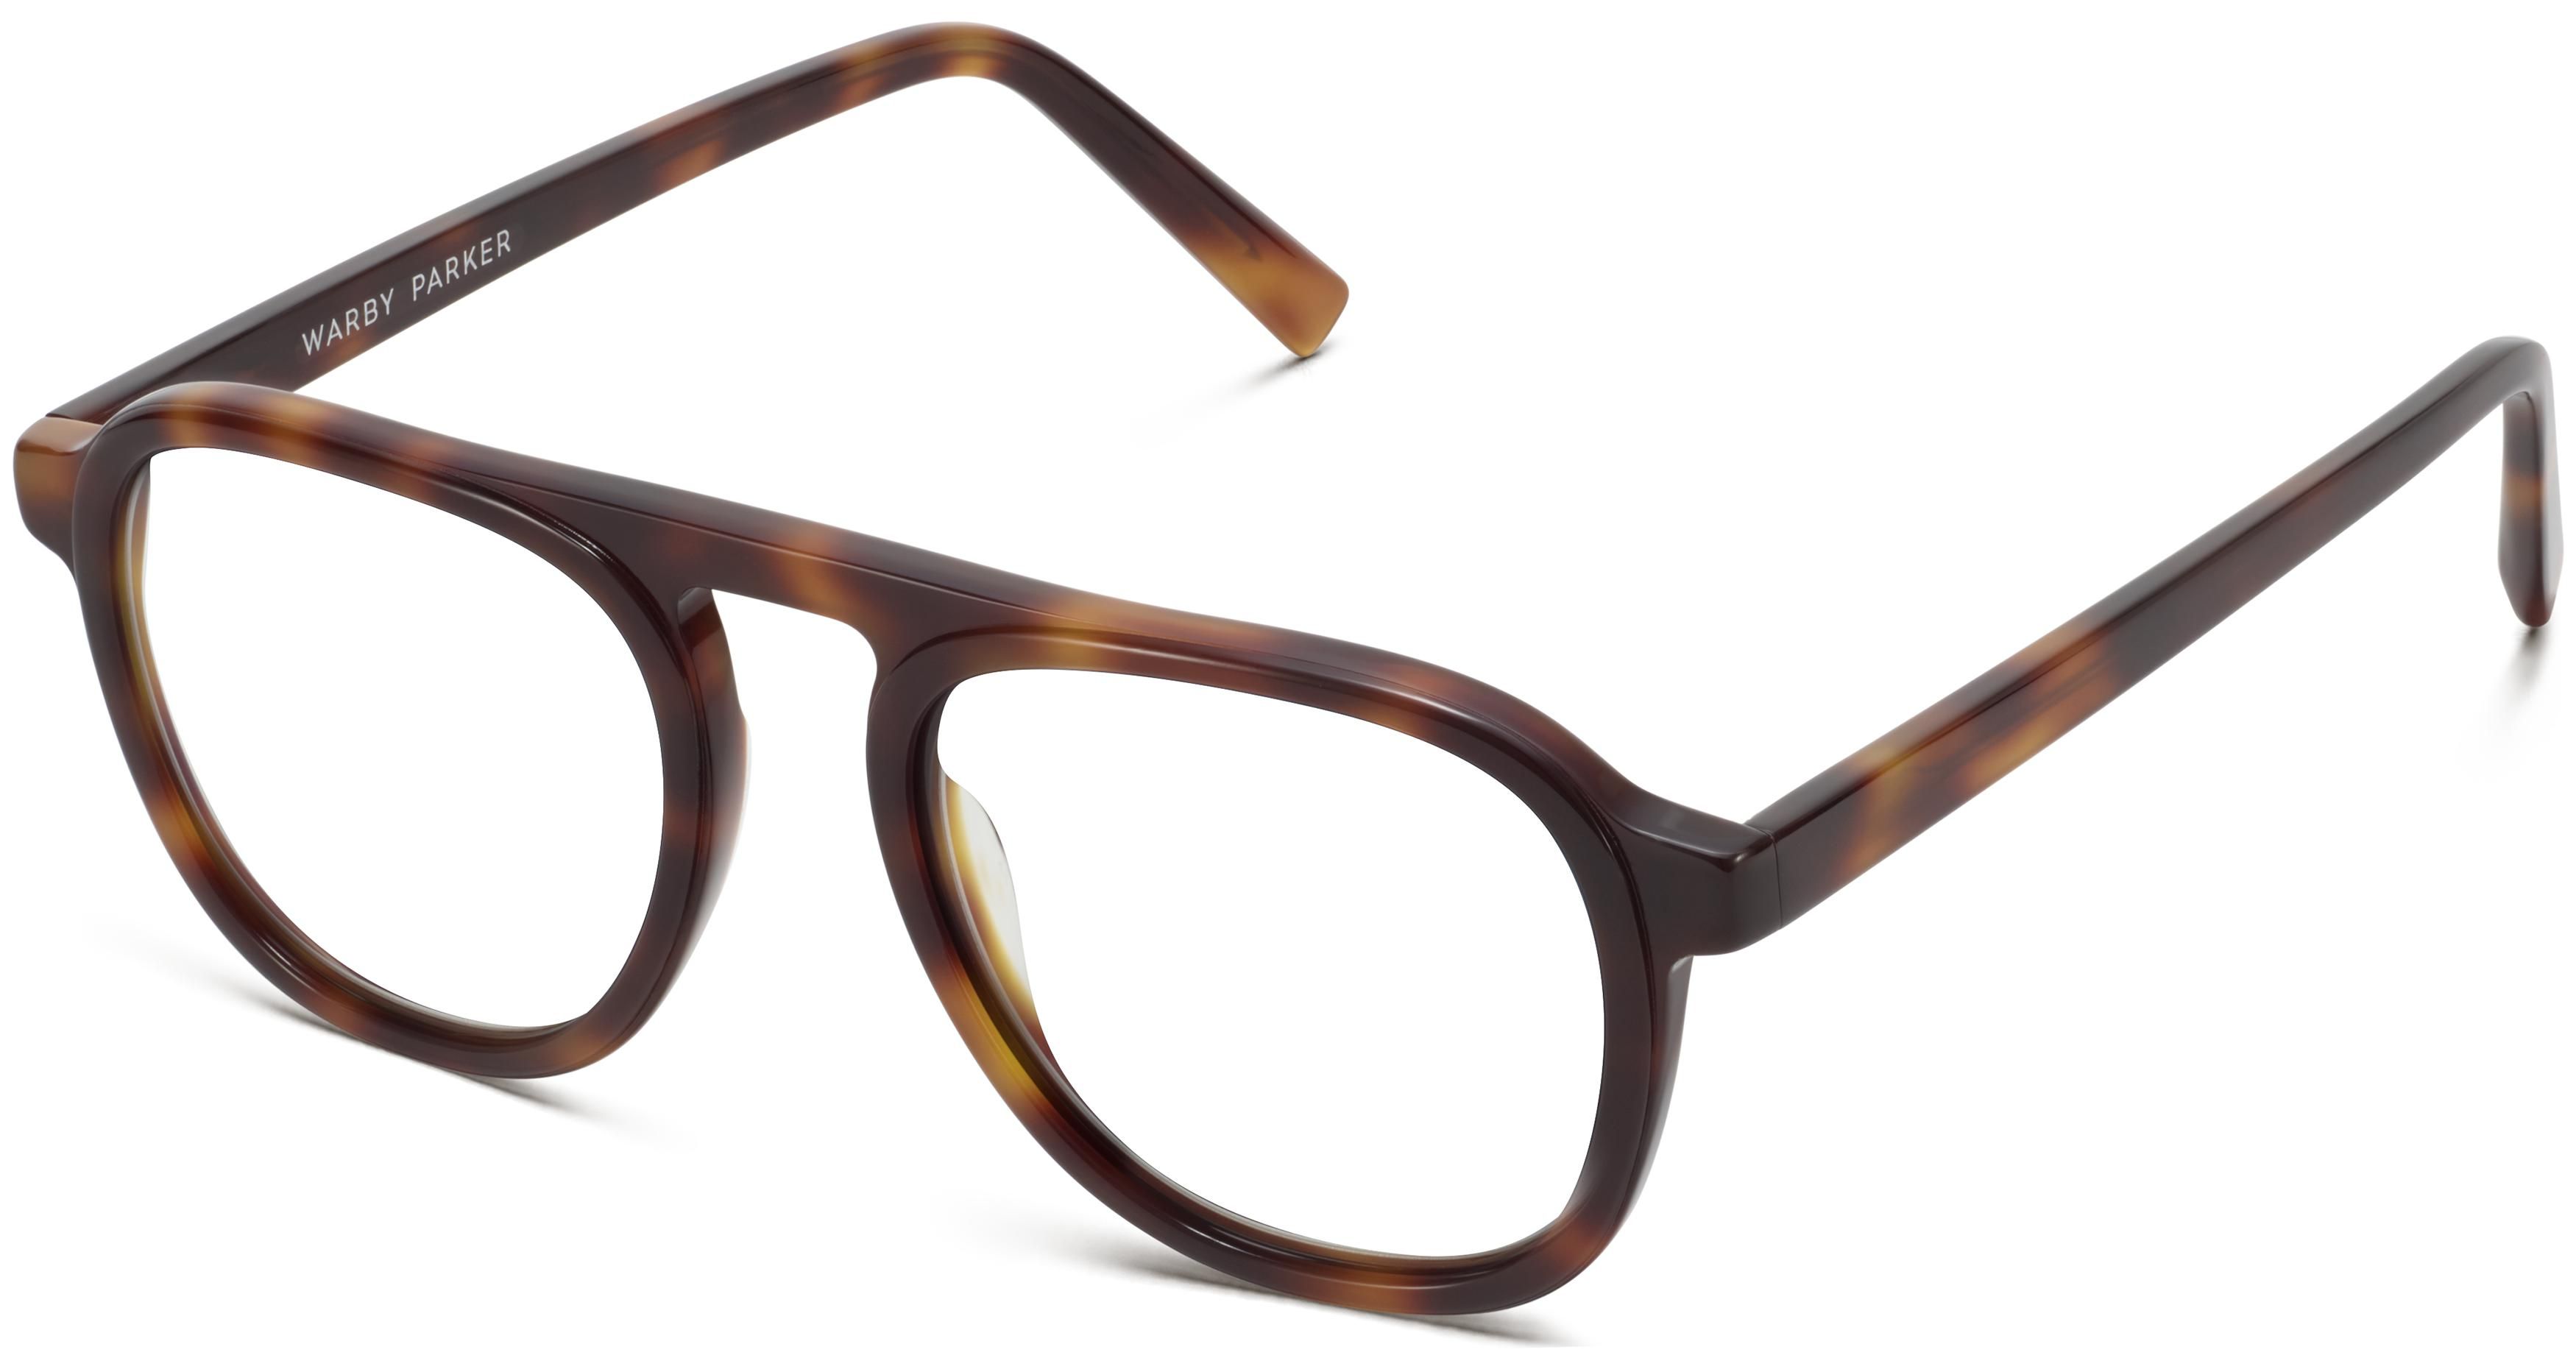 Blaise | Warby Parker (US)